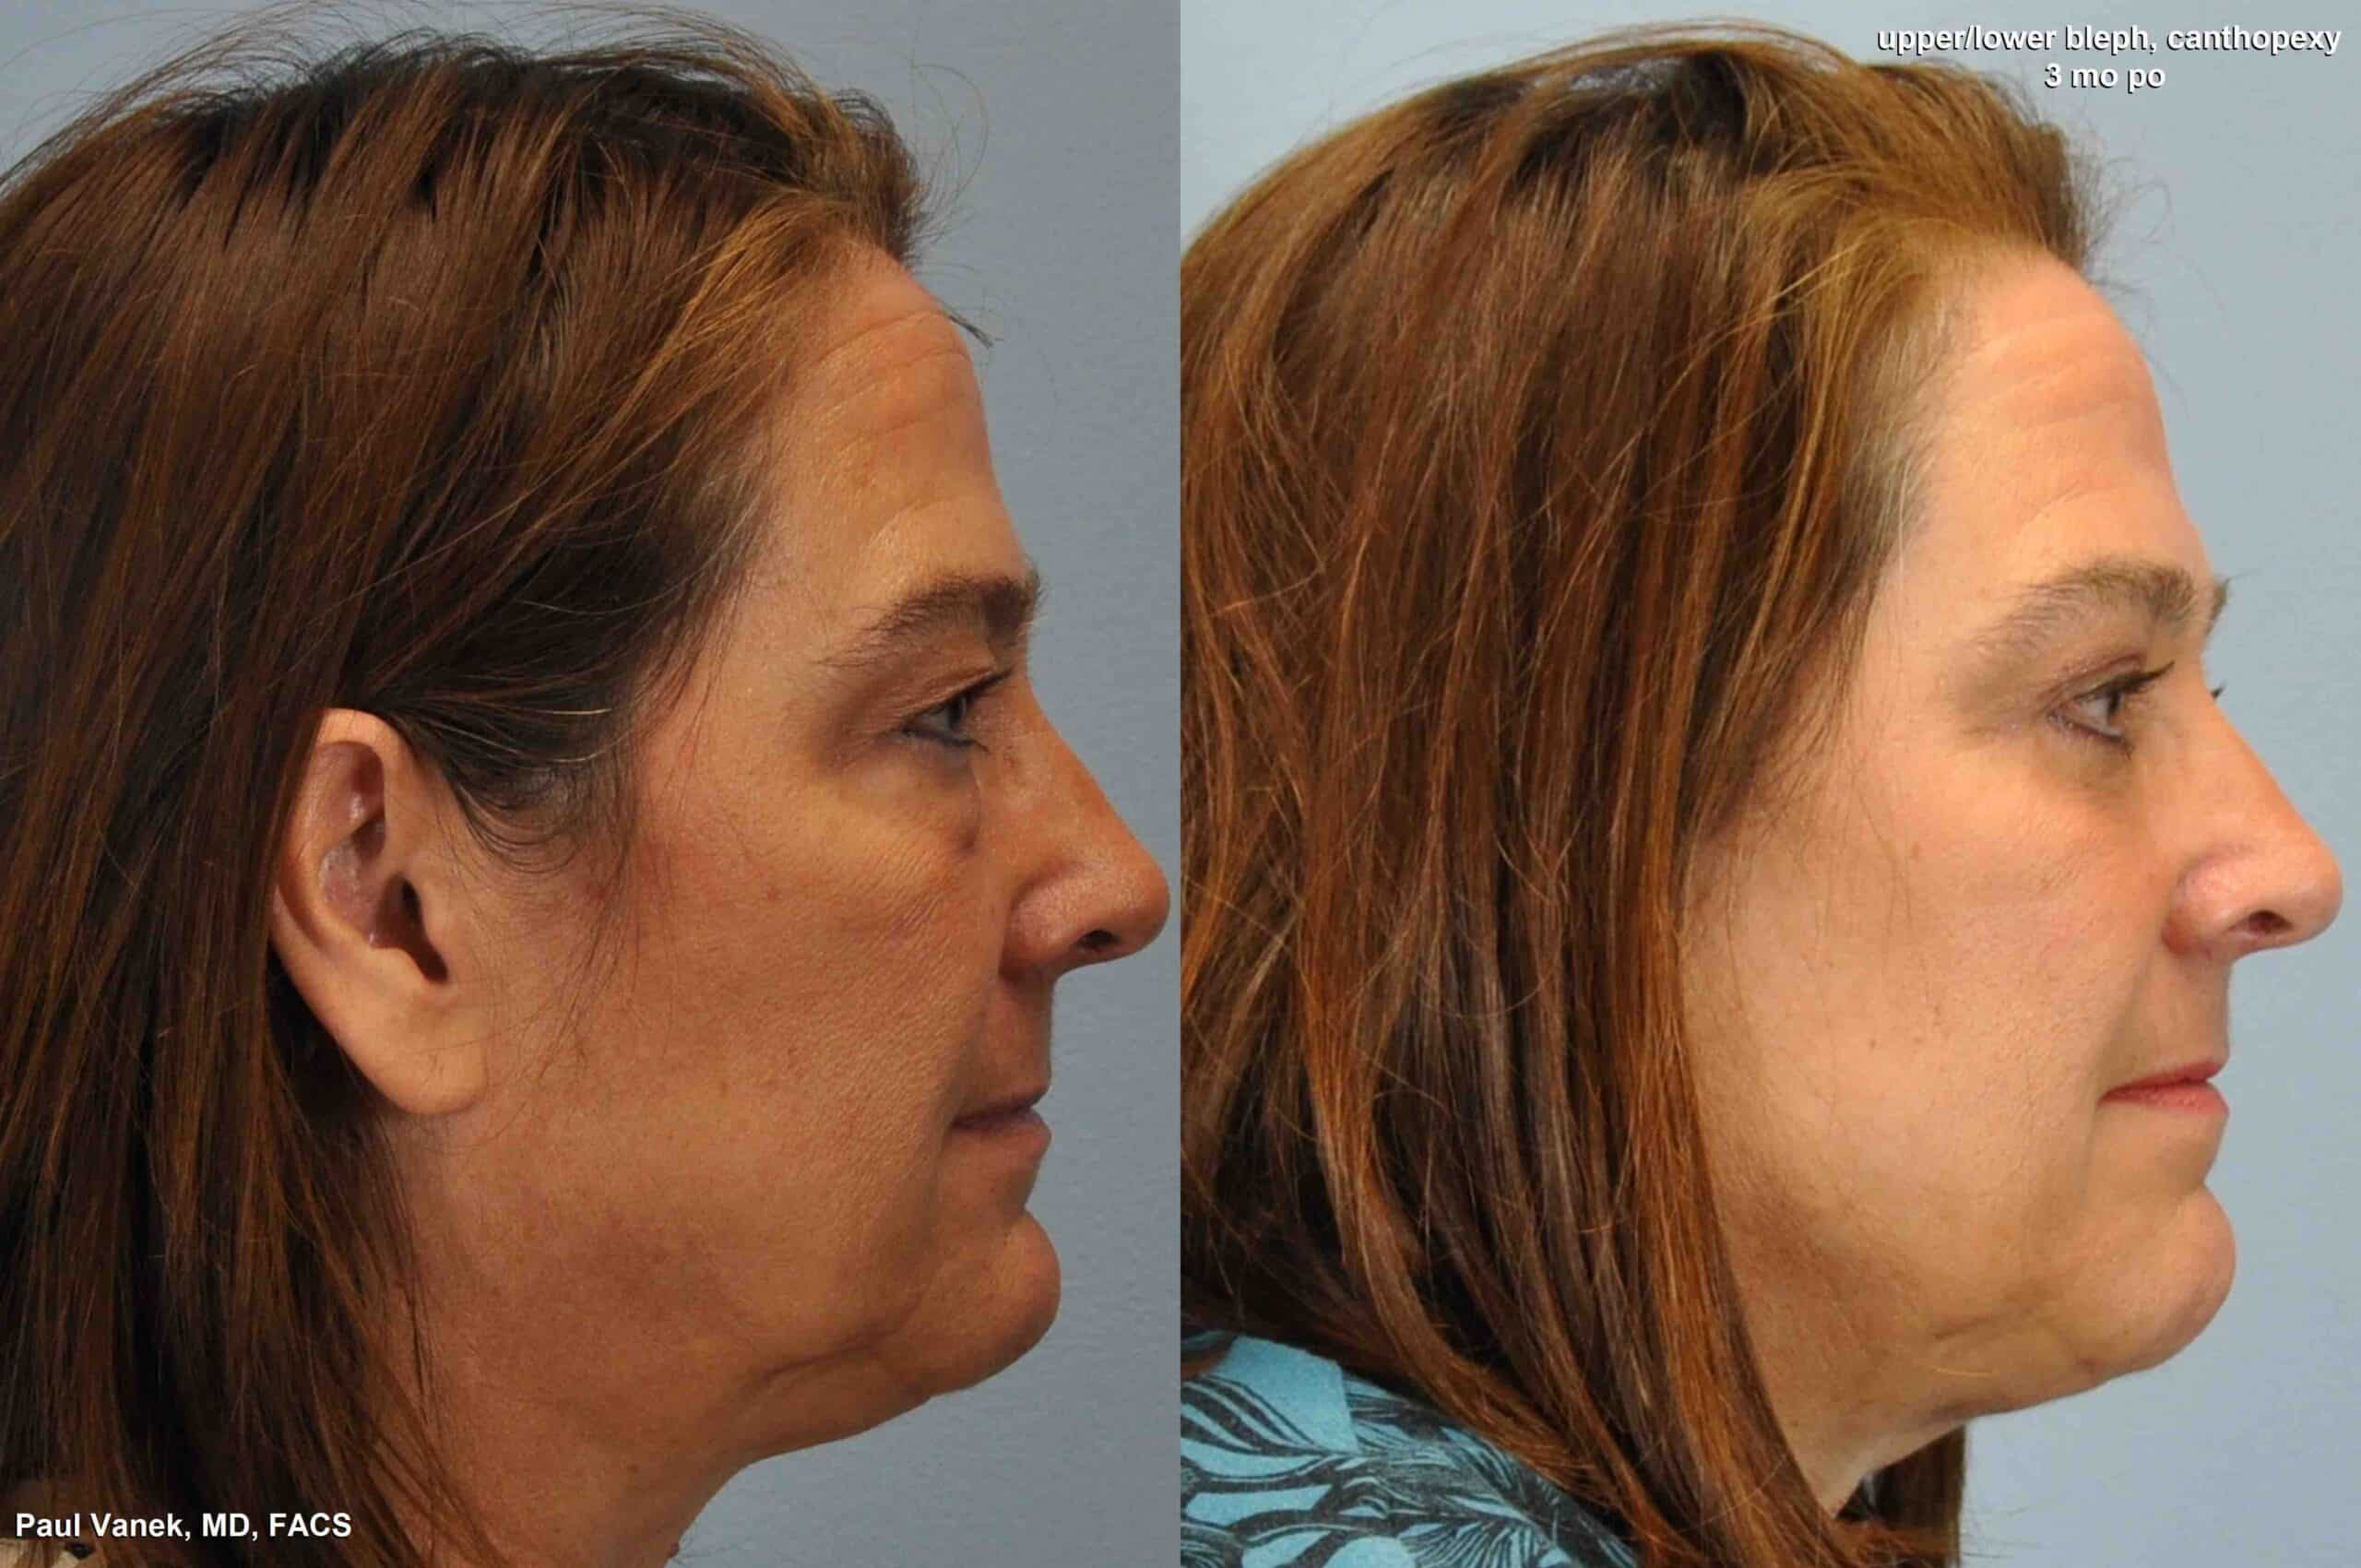 Before and after, 2 mo post op from Upper and Lower Blepharoplasty, Canthoplexy performed by Dr. Paul Vanek (side view)